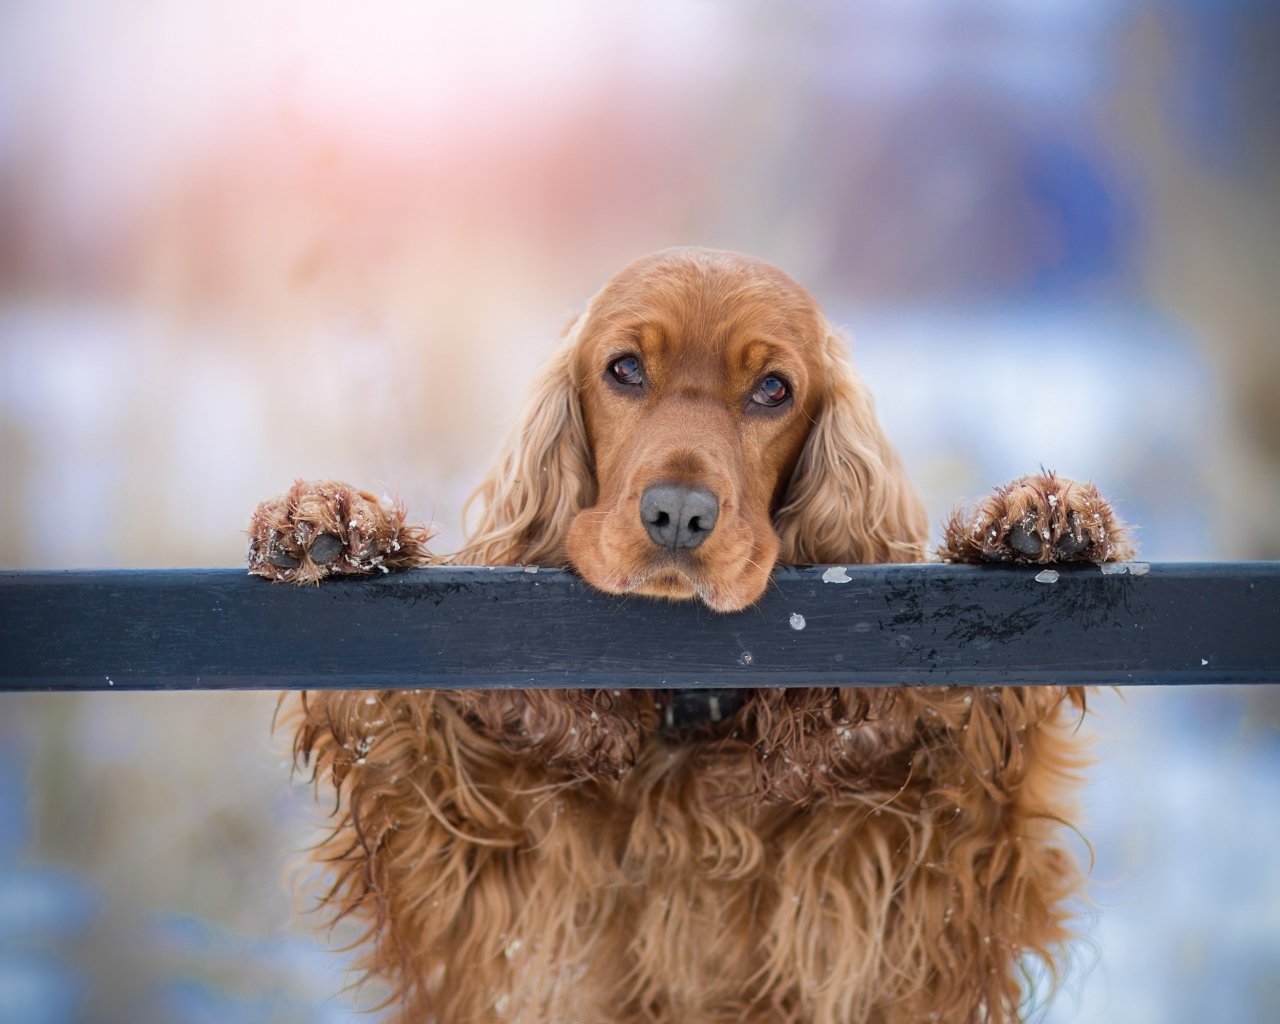 Sad brown spaniel at the fence